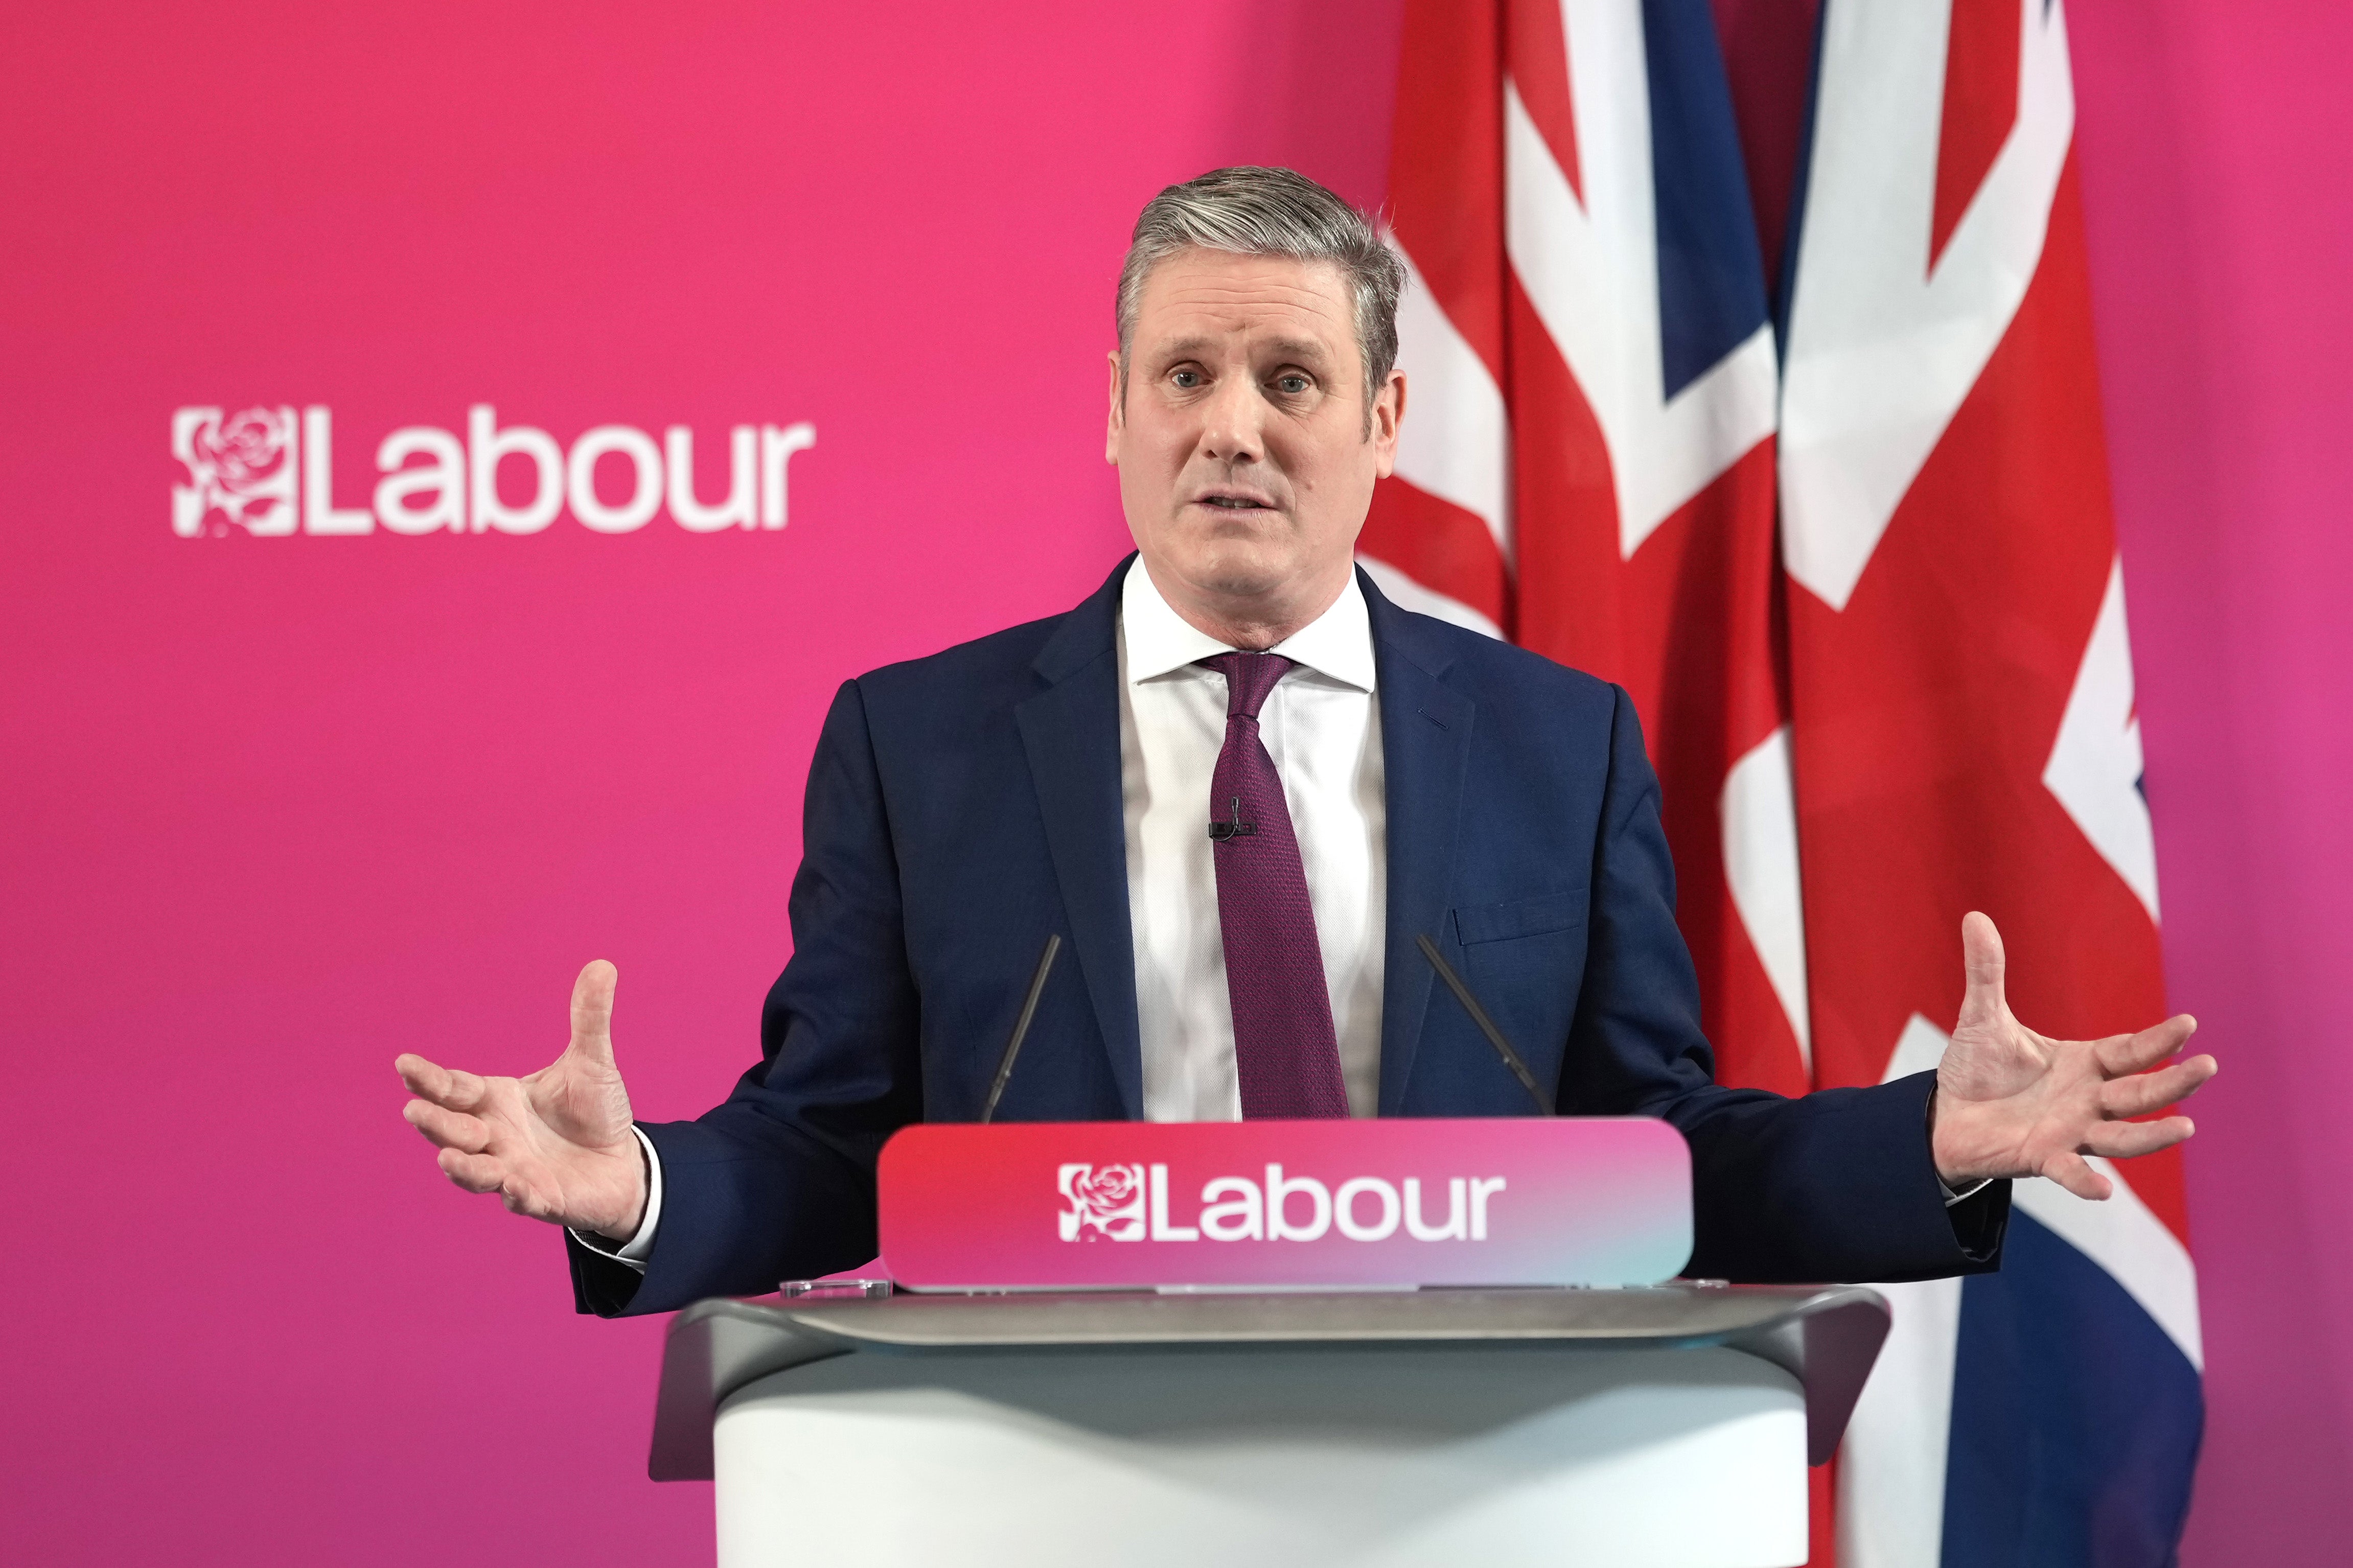 Keir Starmer and his party are ahead of the Tories on crime in some polls